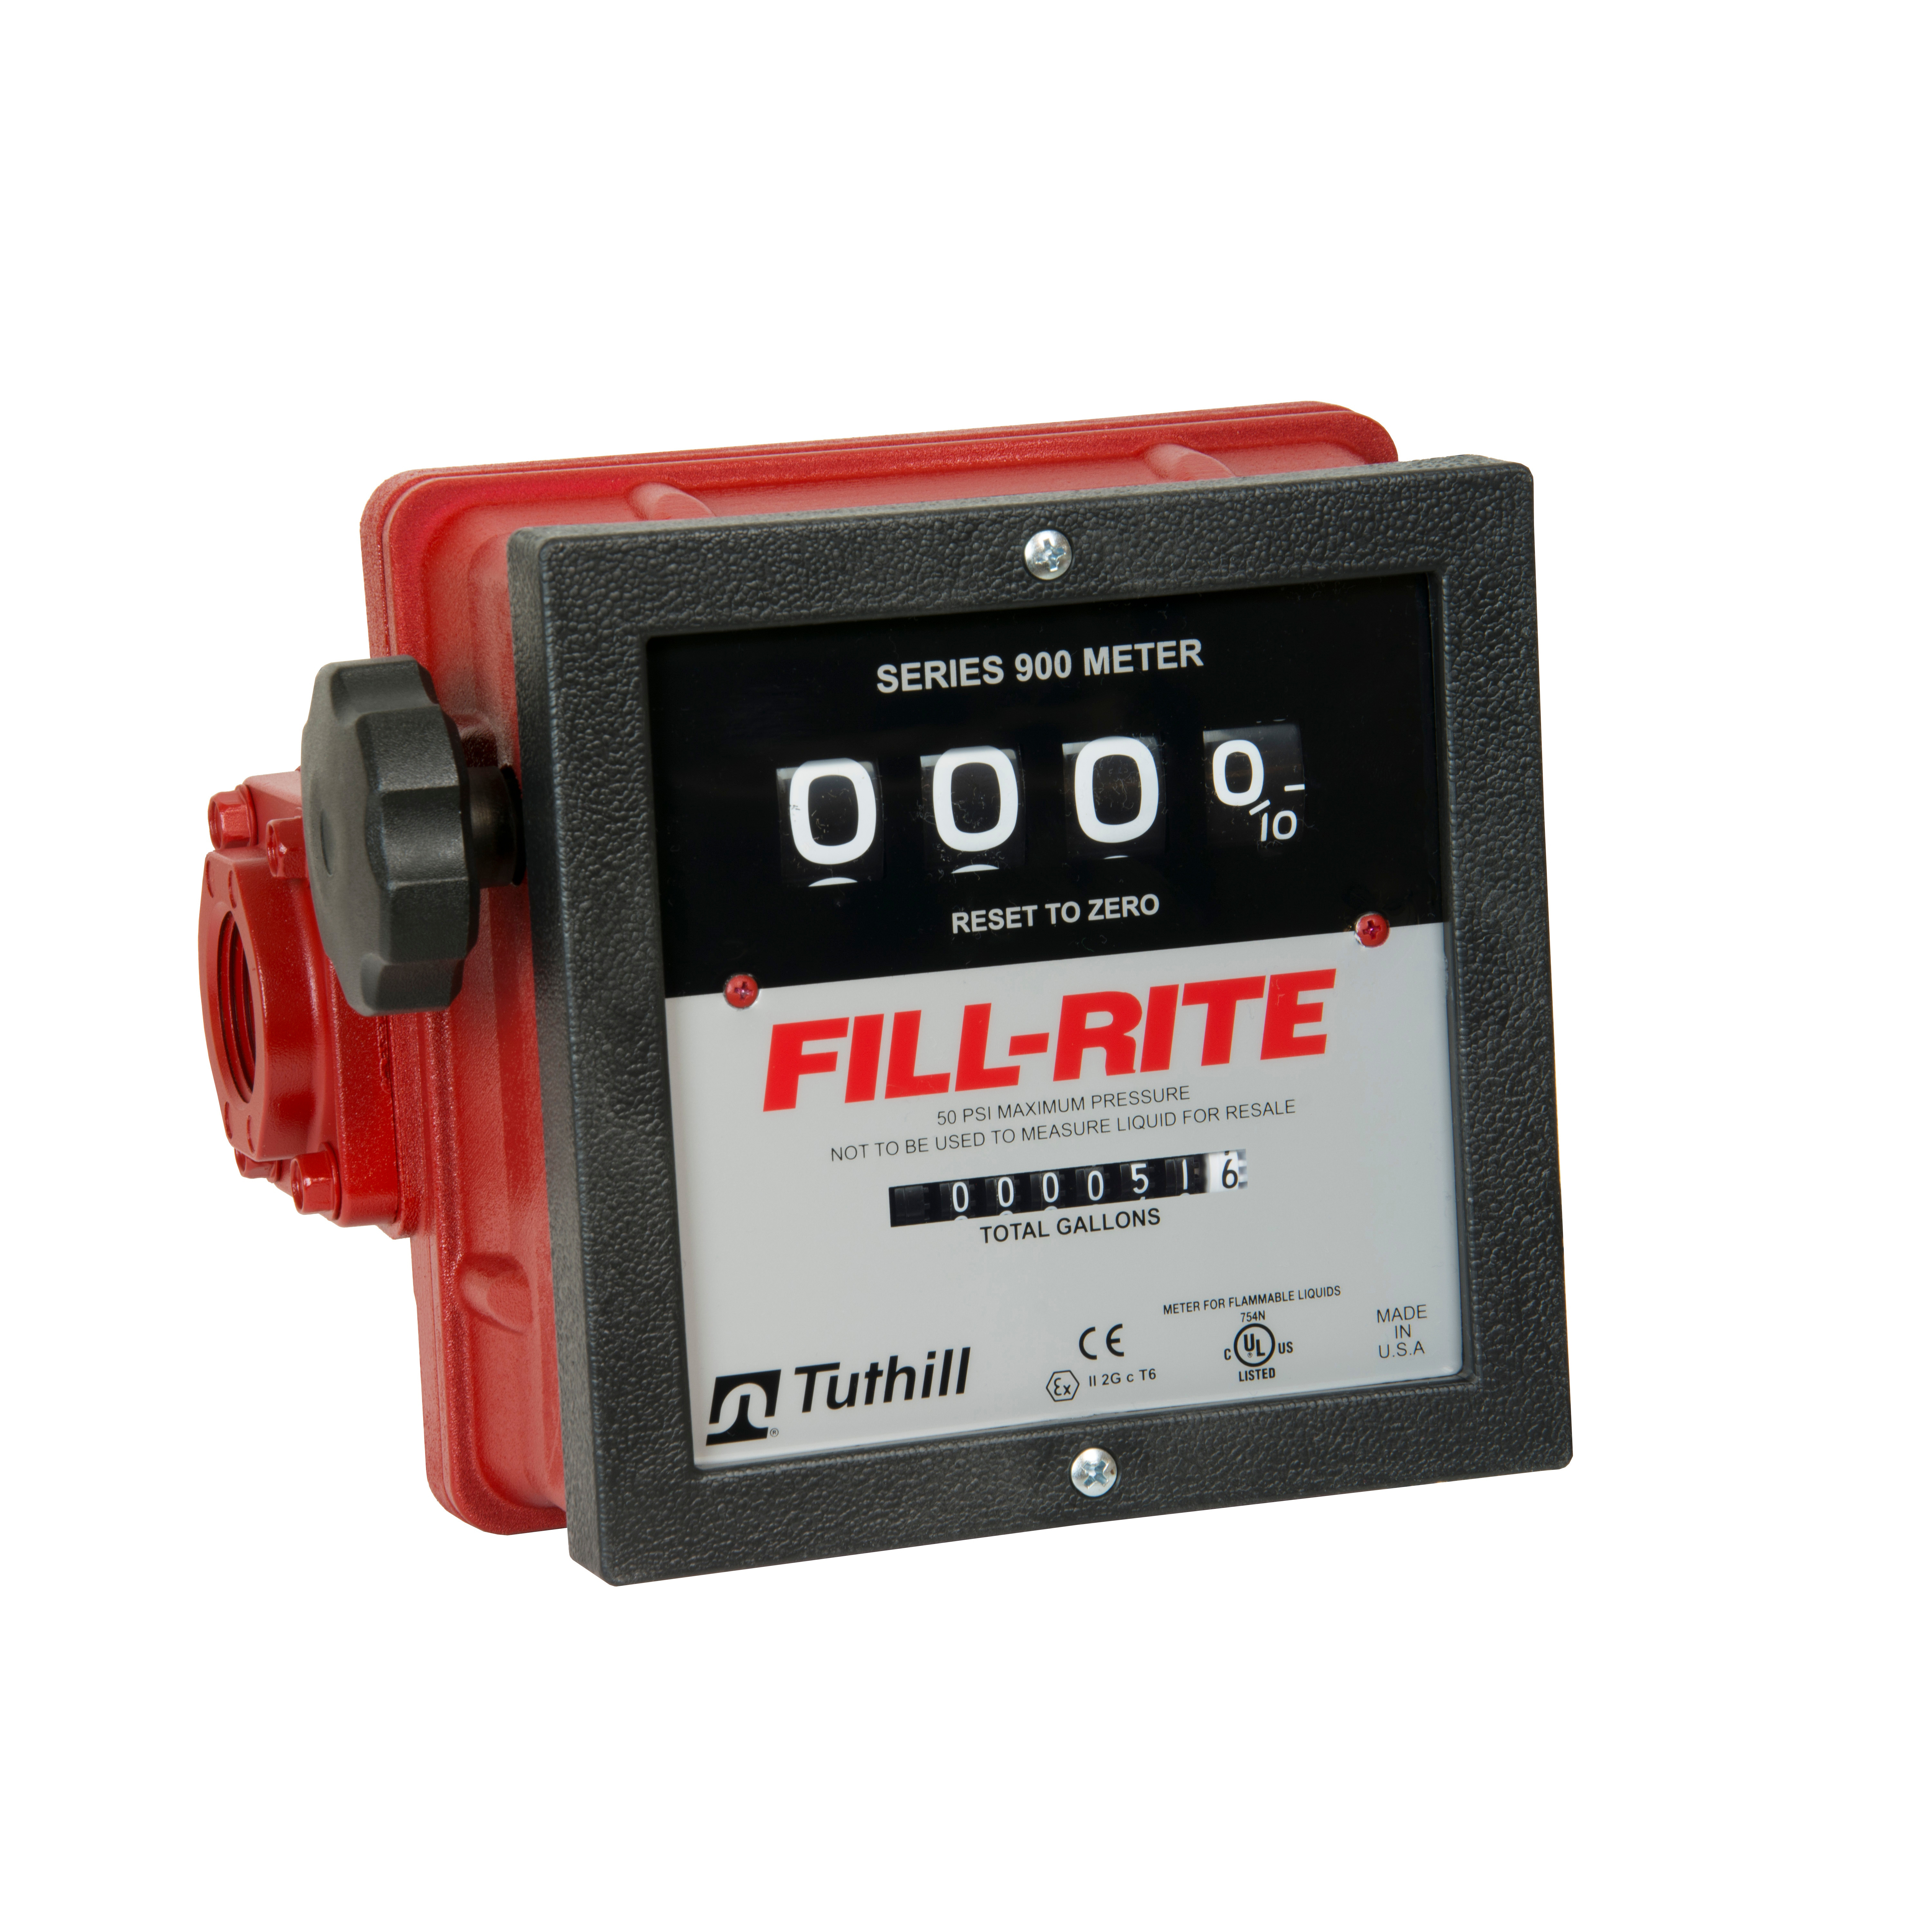 FILL-RITE® 901C Mechanical Flowmeter, 1 in Connection, +/-2 % Accuracy, Aluminum Body, -40 to 140 deg F